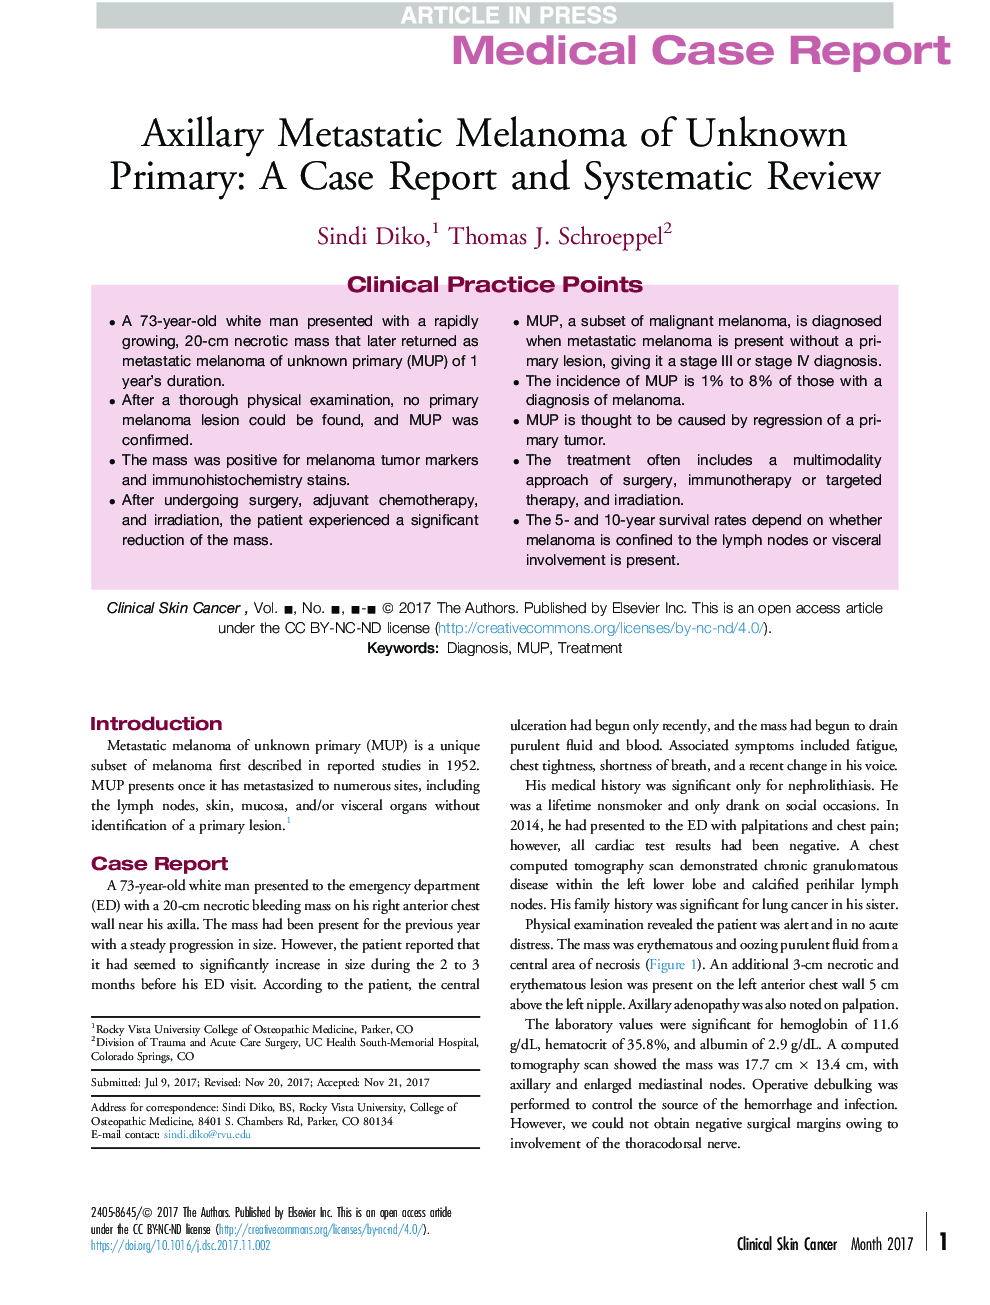 Axillary Metastatic Melanoma of Unknown Primary: A Case Report and Systematic Review